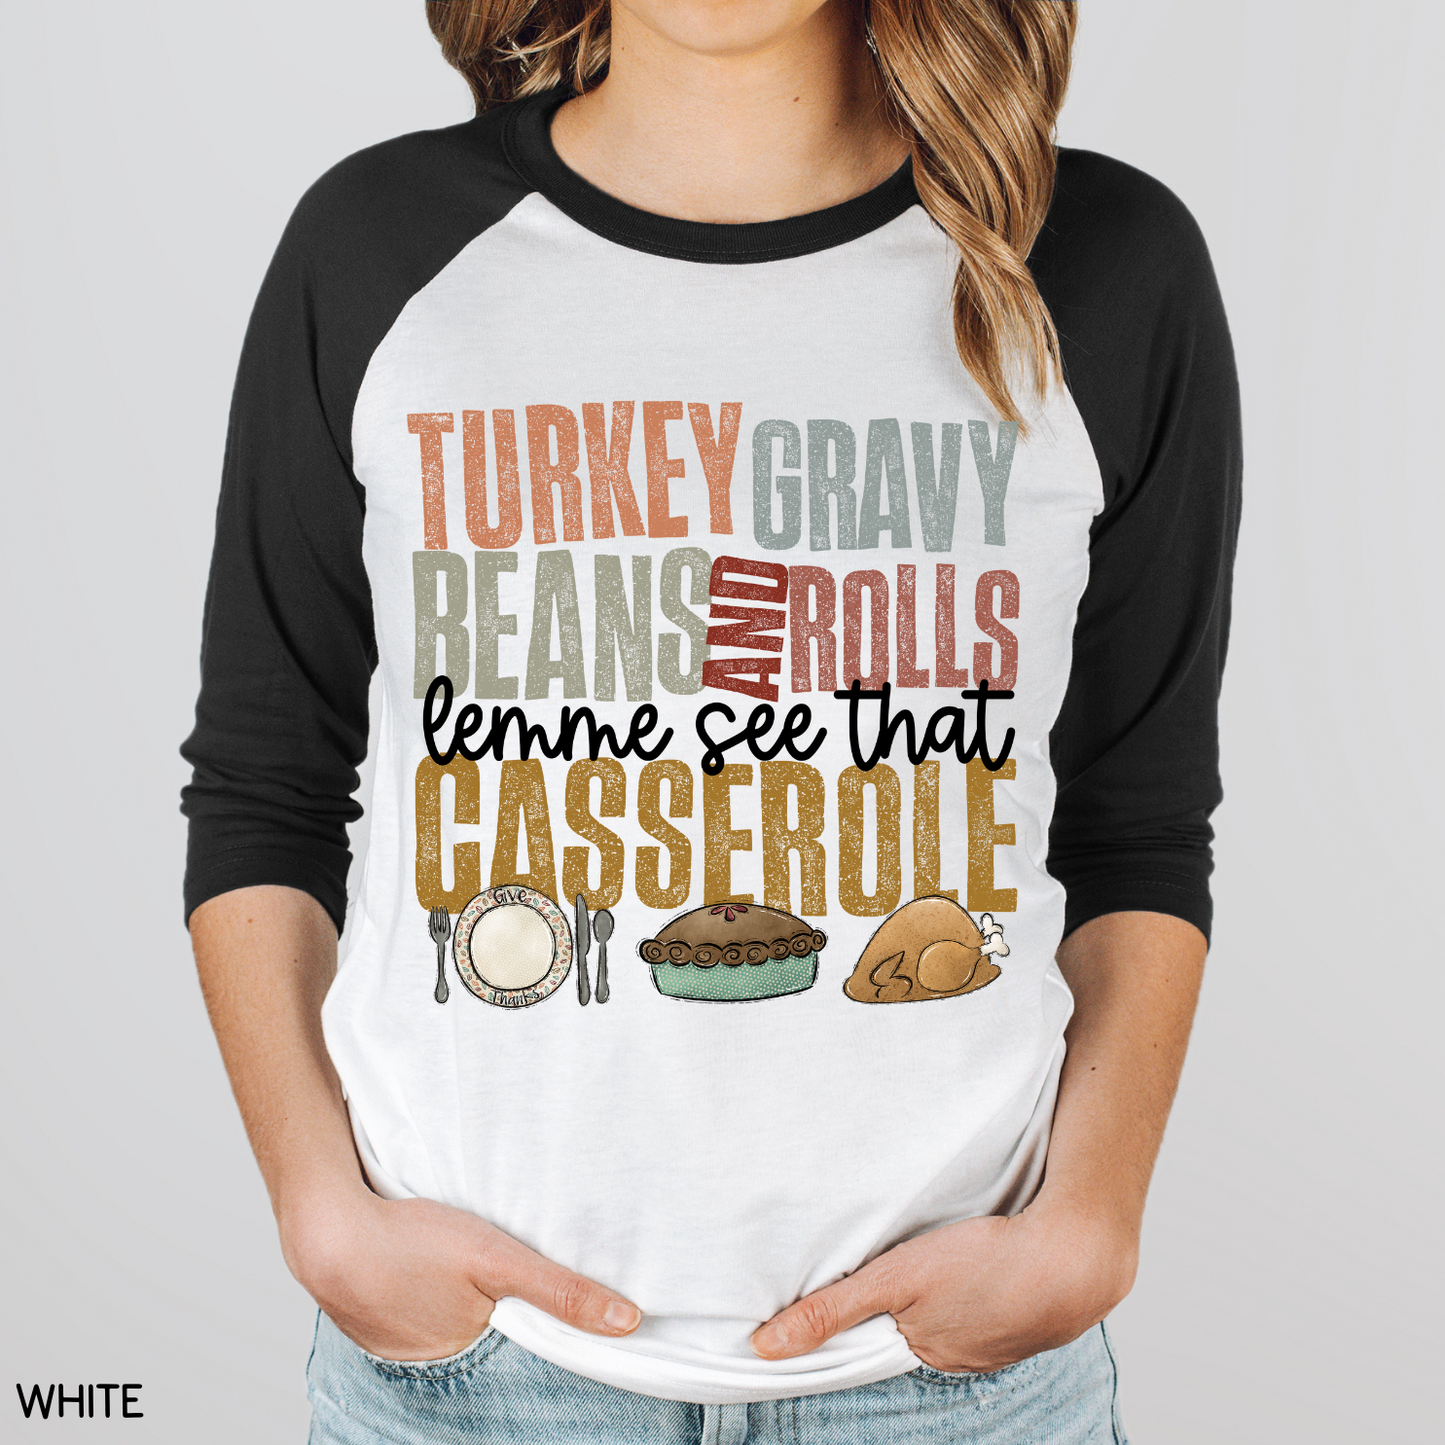 Thanksgiving - Unisex Adult Tee - Let Me See That Casserole